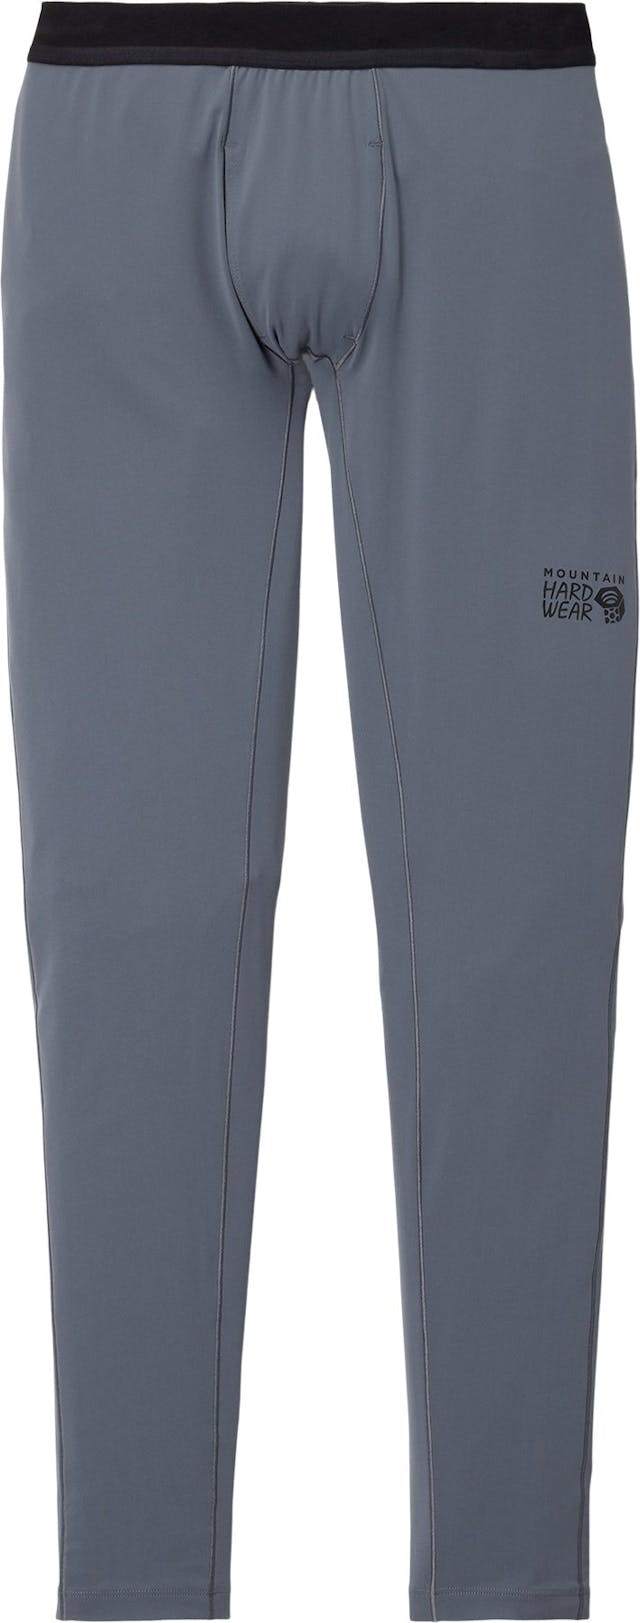 Product image for Mountain Stretch Tight - Men's